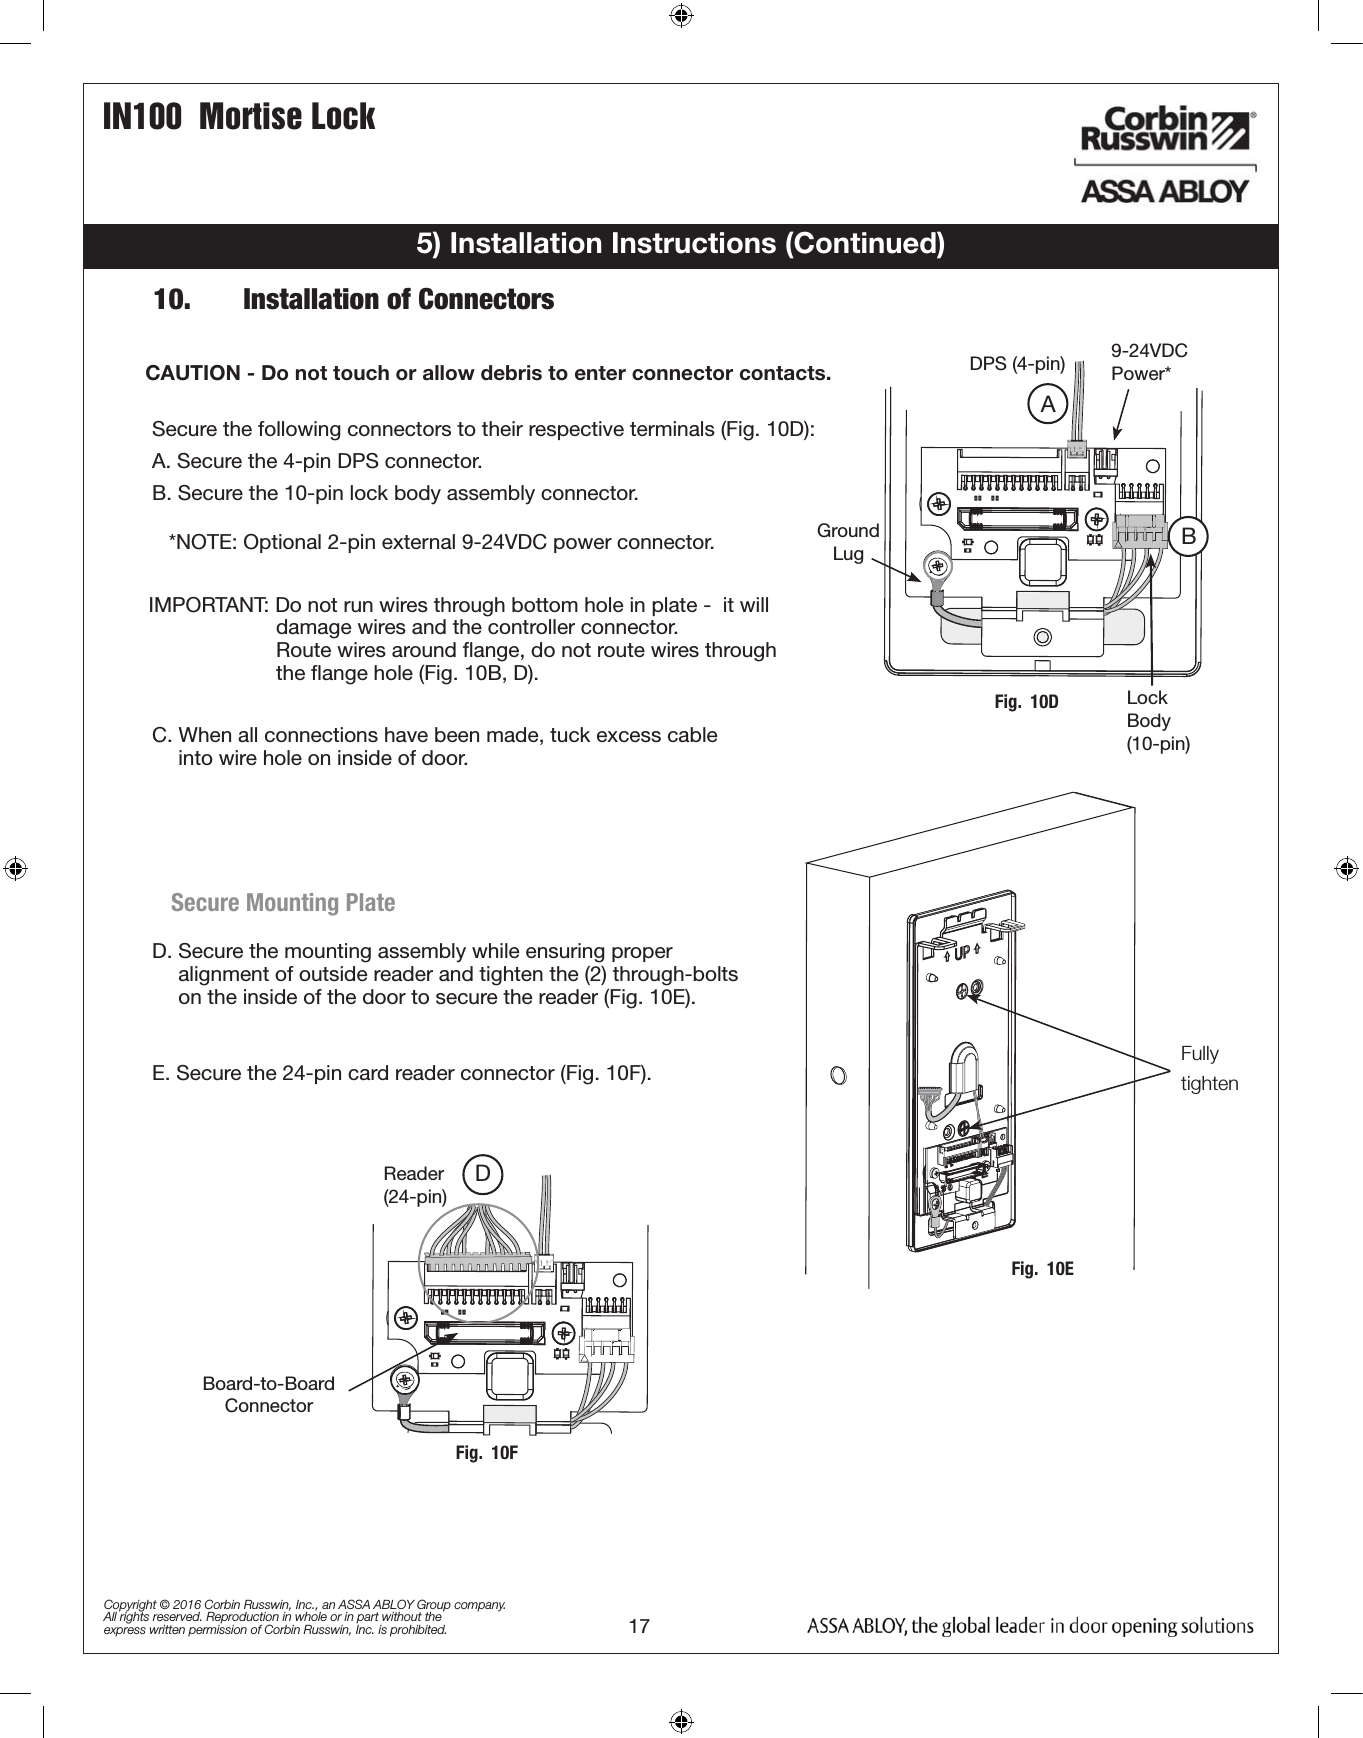 IN100  Mortise Lock17Copyright © 2016 Corbin Russwin, Inc., an ASSA ABLOY Group company. All rights reserved. Reproduction in whole or in part without the express written permission of Corbin Russwin, Inc. is prohibited.5) Installation Instructions (Continued)Secure the following connectors to their respective terminals (Fig. 10D):A. Secure the 4-pin DPS connector.B. Secure the 10-pin lock body assembly connector.CAUTION - Do not touch or allow debris to enter connector contacts. IMPORTANT: Do not run wires through bottom hole in plate -  it will                       damage wires and the controller connector.                        Route wires around ﬂange, do not route wires through                        the ﬂange hole (Fig. 10B, D).E. Secure the 24-pin card reader connector (Fig. 10F).Ground  LugDPS (4-pin)ALock Body (10-pin)Fig.  10DBReader (24-pin)Board-to-Board ConnectorFig.  10FDD. Secure the mounting assembly while ensuring proper             alignment of outside reader and tighten the (2) through-bolts            on the inside of the door to secure the reader (Fig. 10E).Secure Mounting Plate*NOTE: Optional 2-pin external 9-24VDC power connector.9-24VDC Power*C. When all connections have been made, tuck excess cable             into wire hole on inside of door.Fig.  10EFully tighten10.   Installation of Connectors